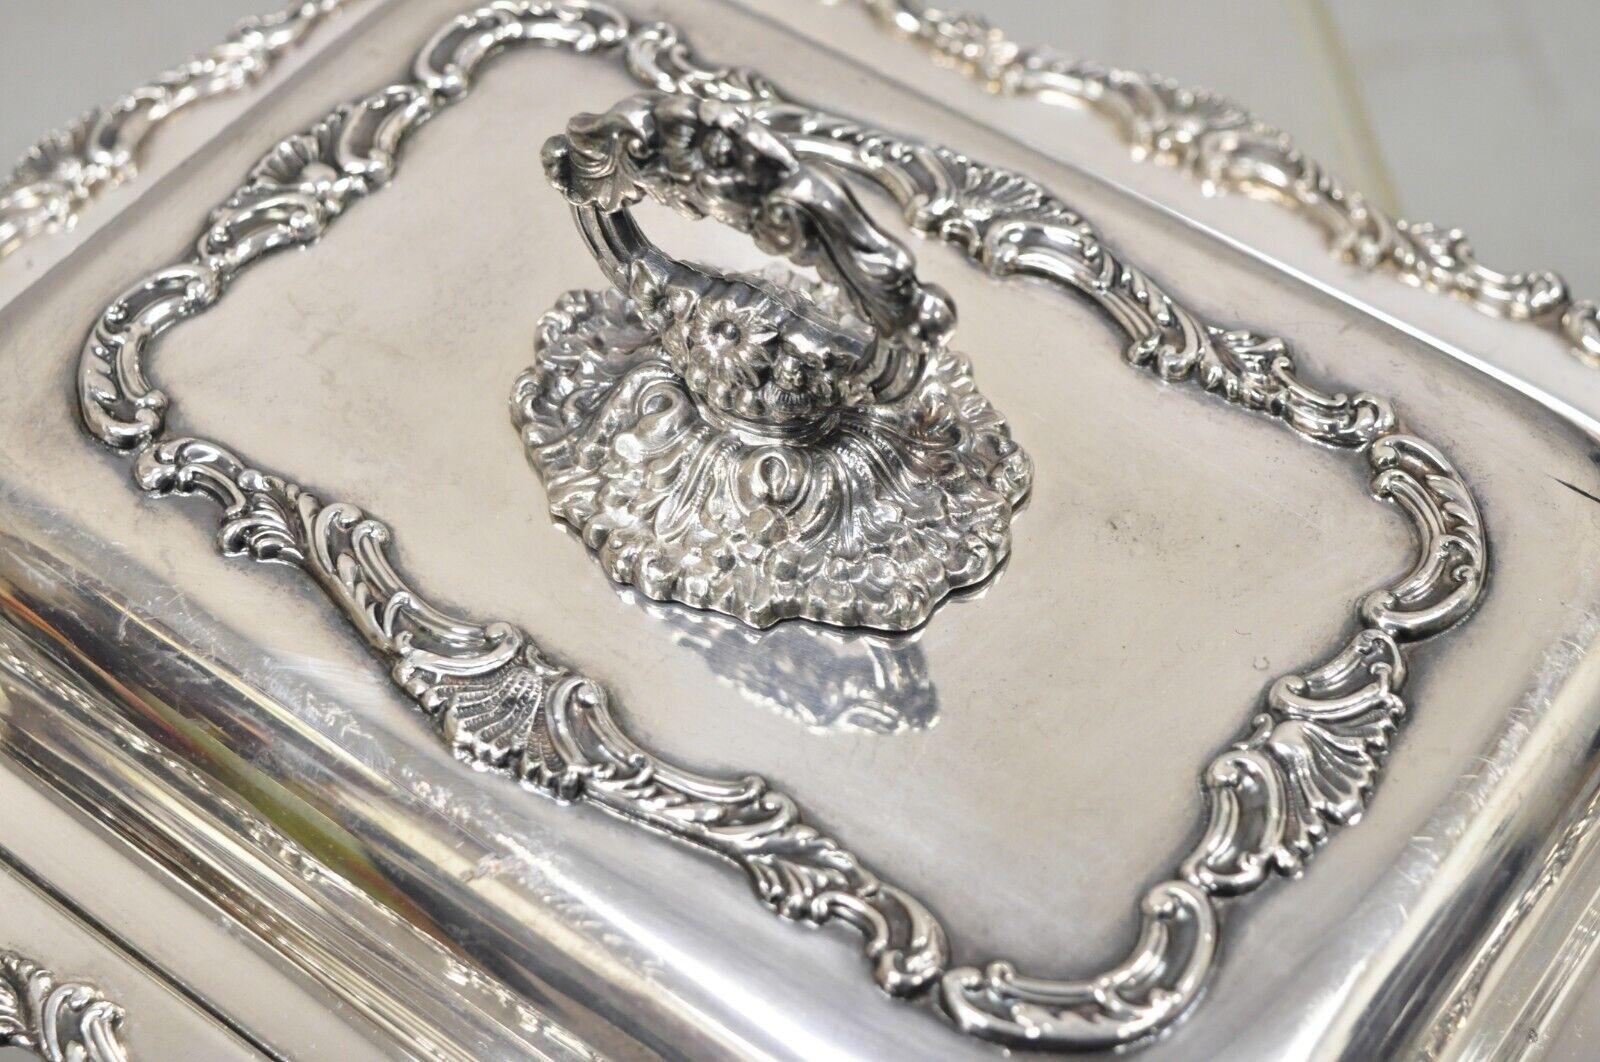 Vintage Silver Plated Victorian Style Ornate Lidded Covered Serving Dish In Good Condition For Sale In Philadelphia, PA